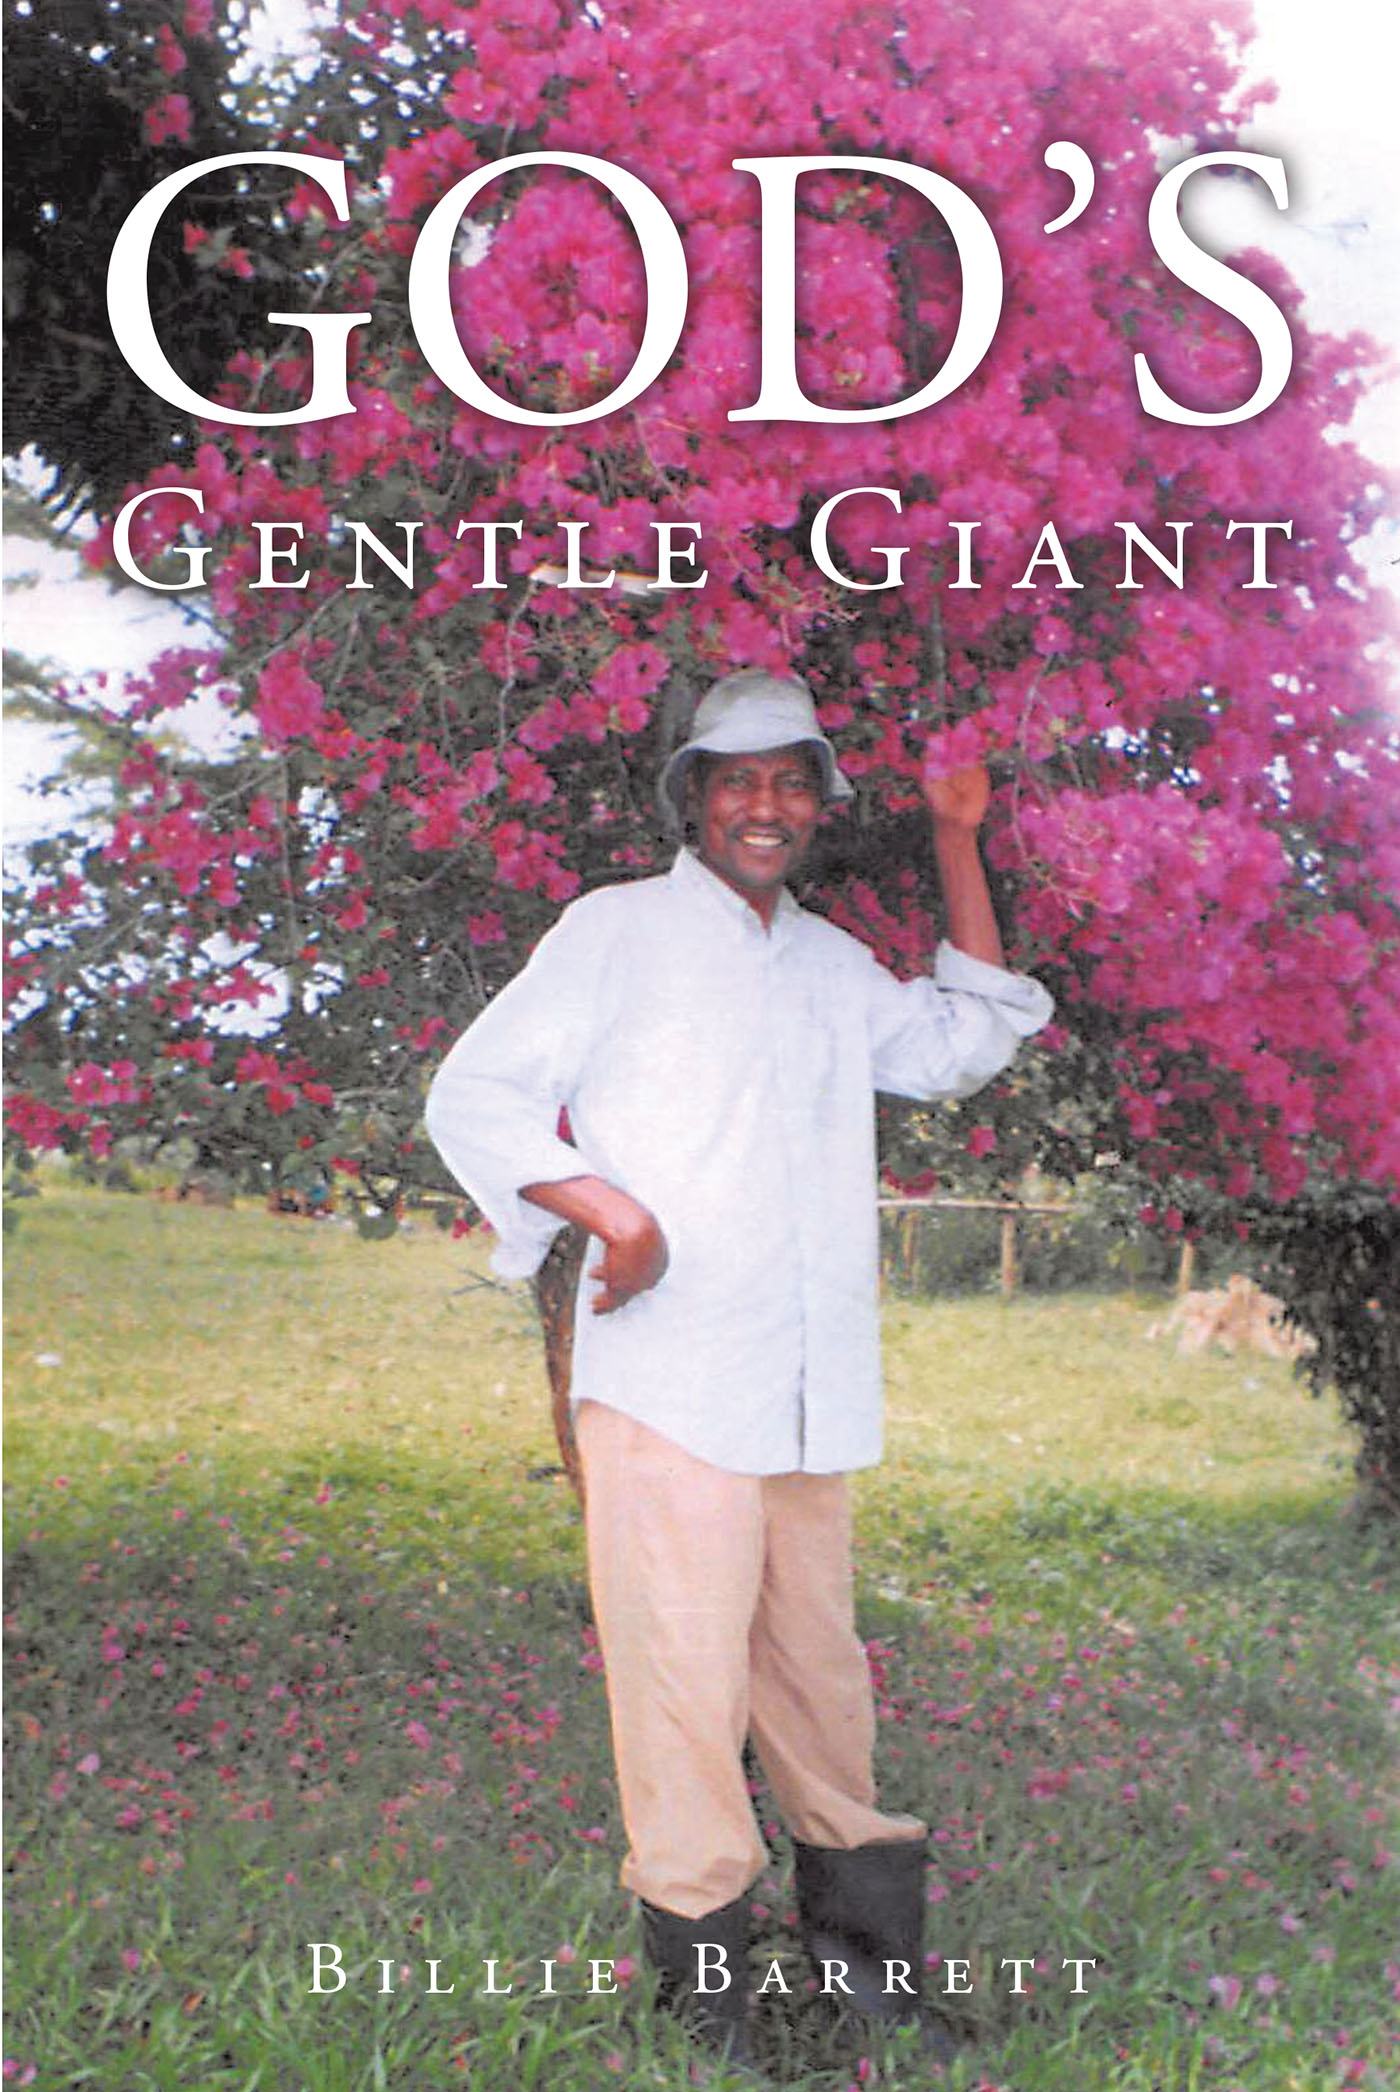 Billie Barrett’s Newly Released "God’s Gentle Giant" is an Engaging Memoir That Takes Readers to the Heart of Mission Work